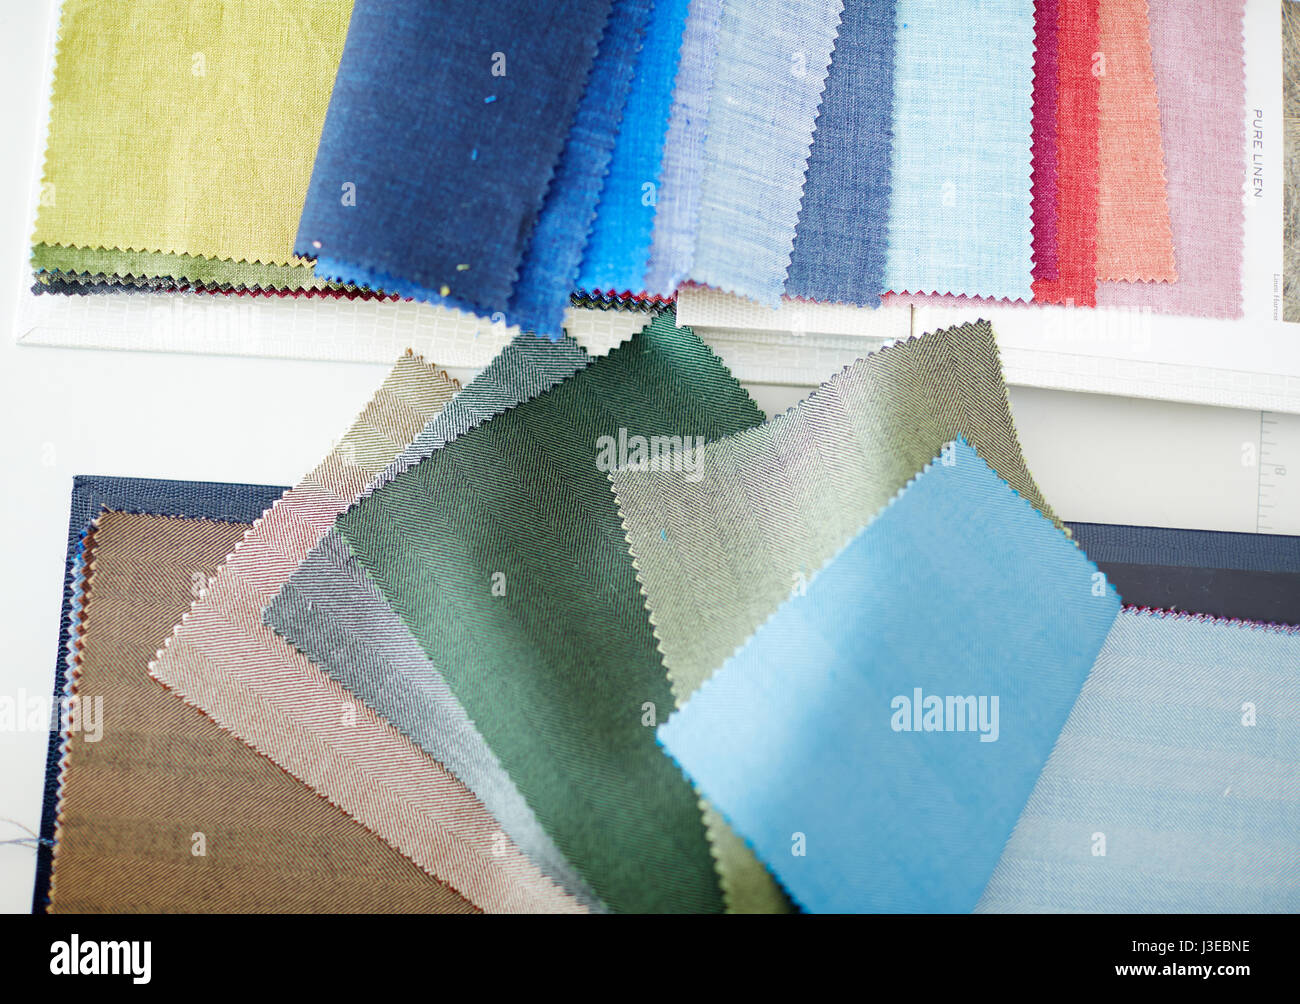 Colorful Fabric Samples Stock Photo